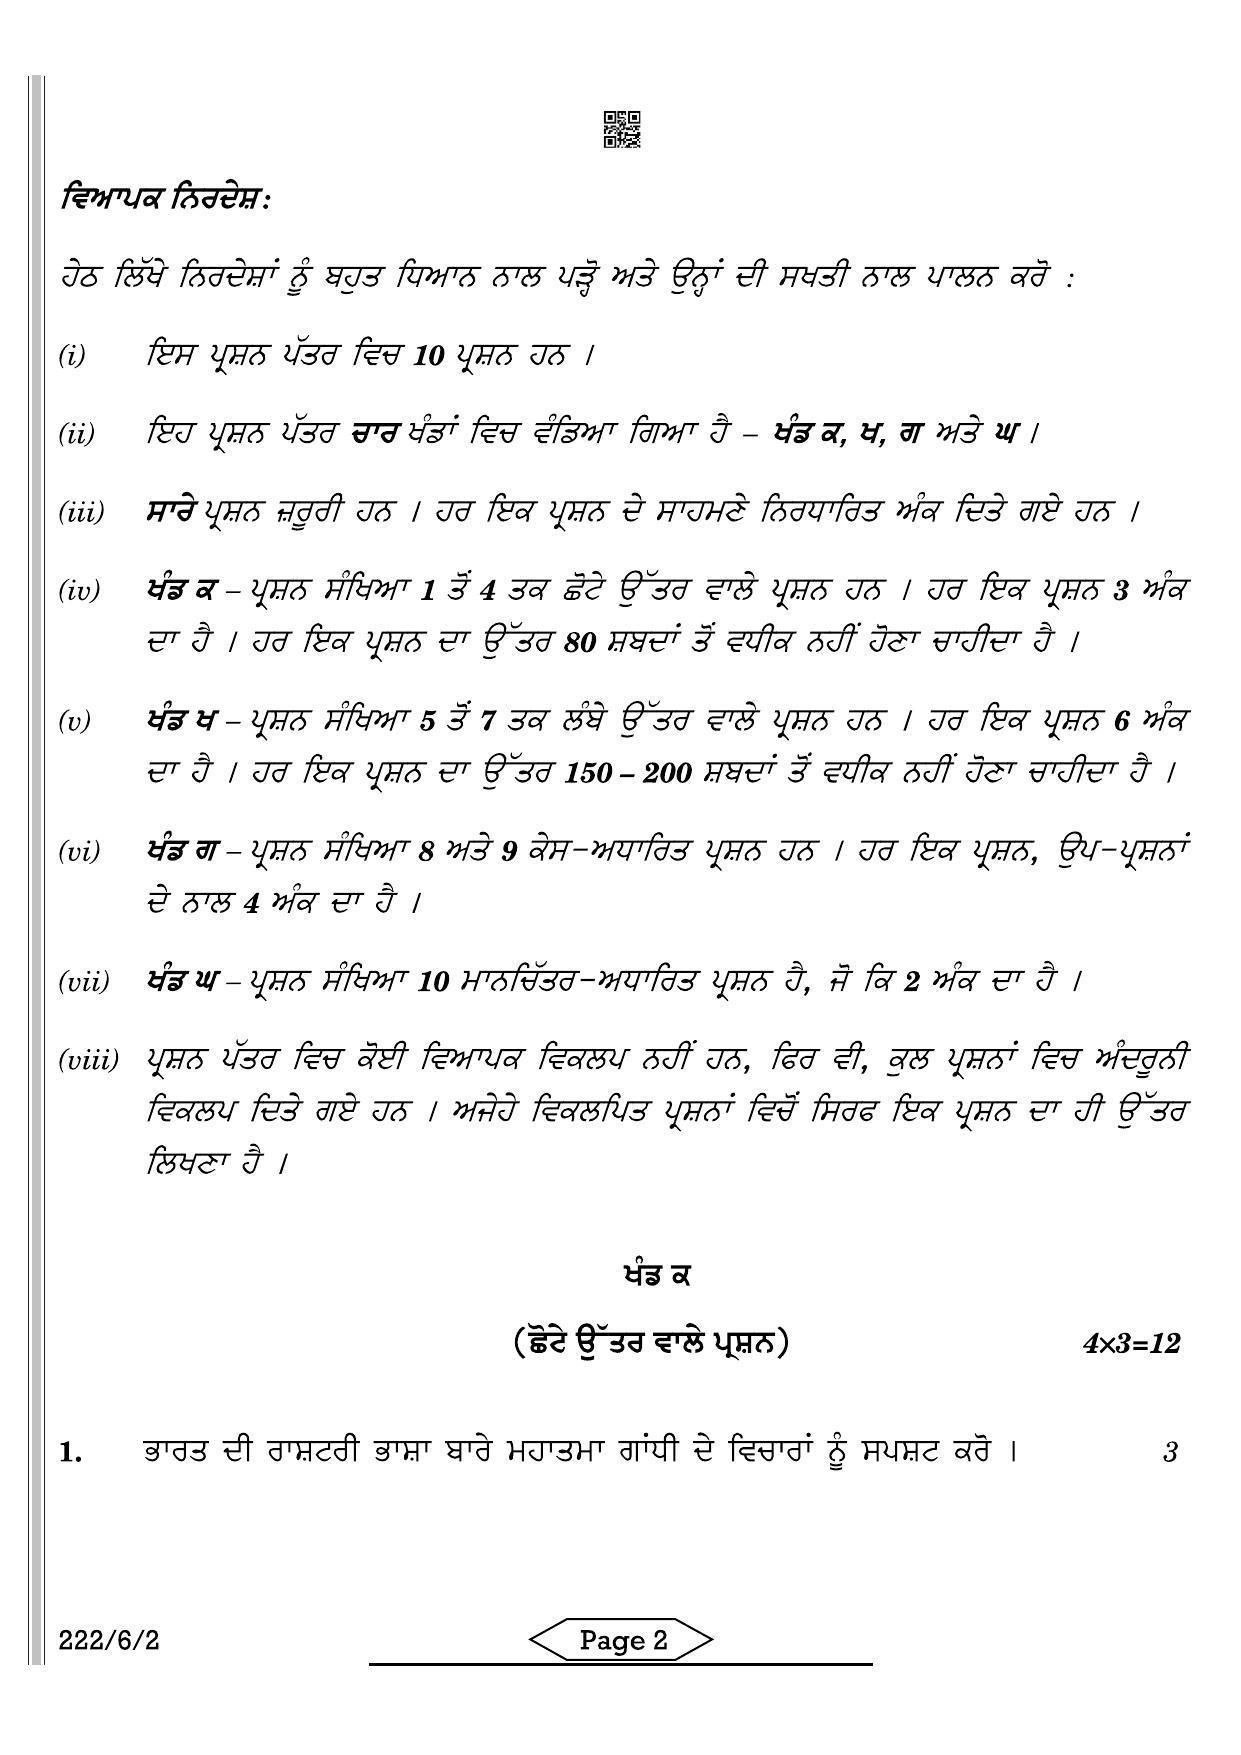 CBSE Class 12 222-6-2 History Punjabi 2022 Compartment Question Paper - Page 2